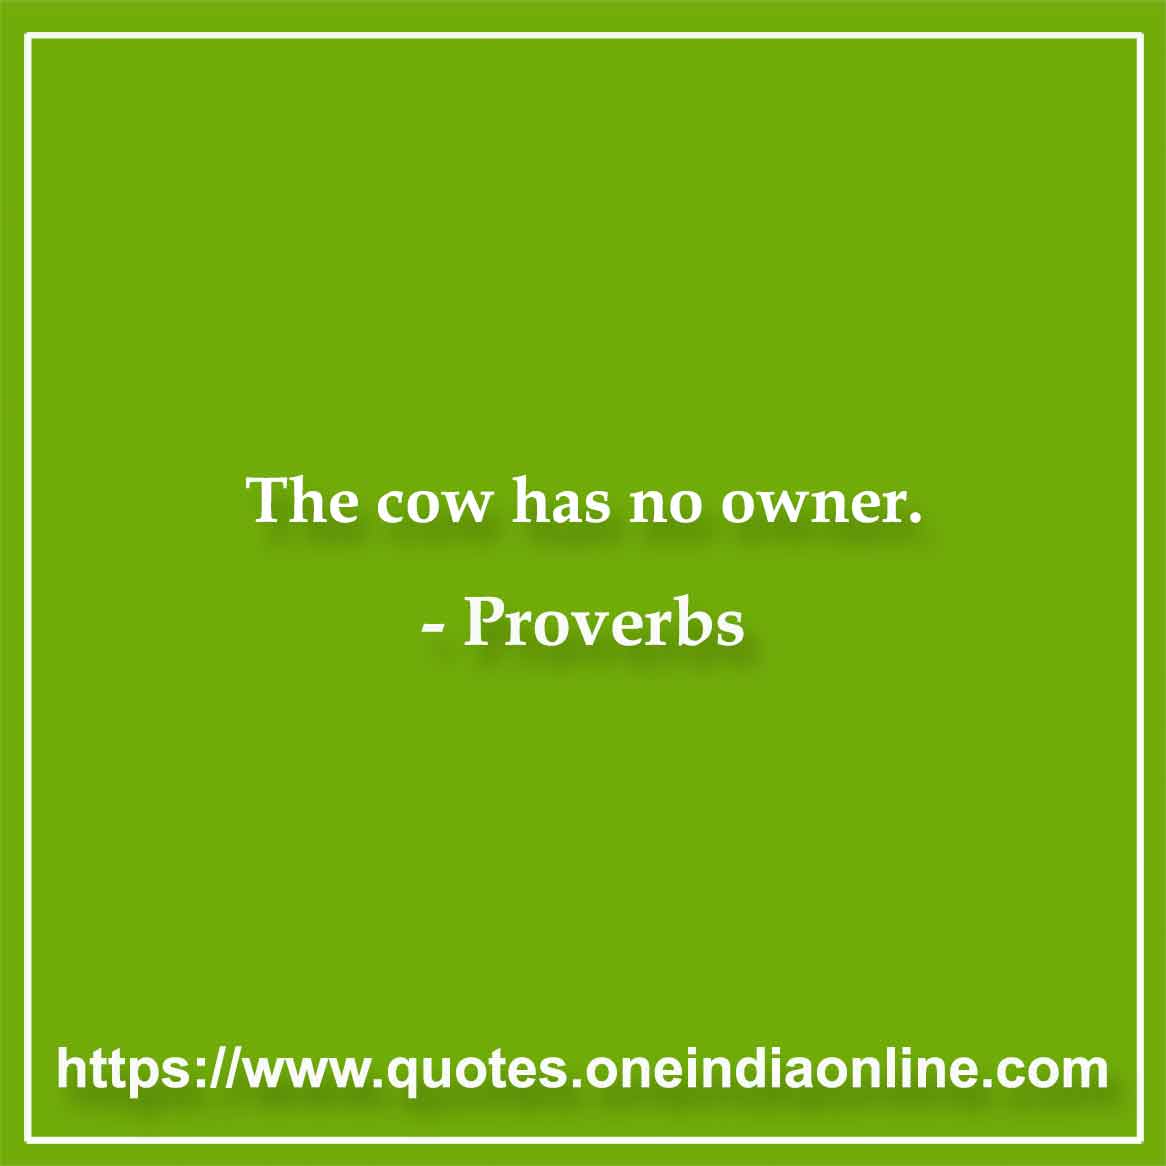 The cow has no owner.